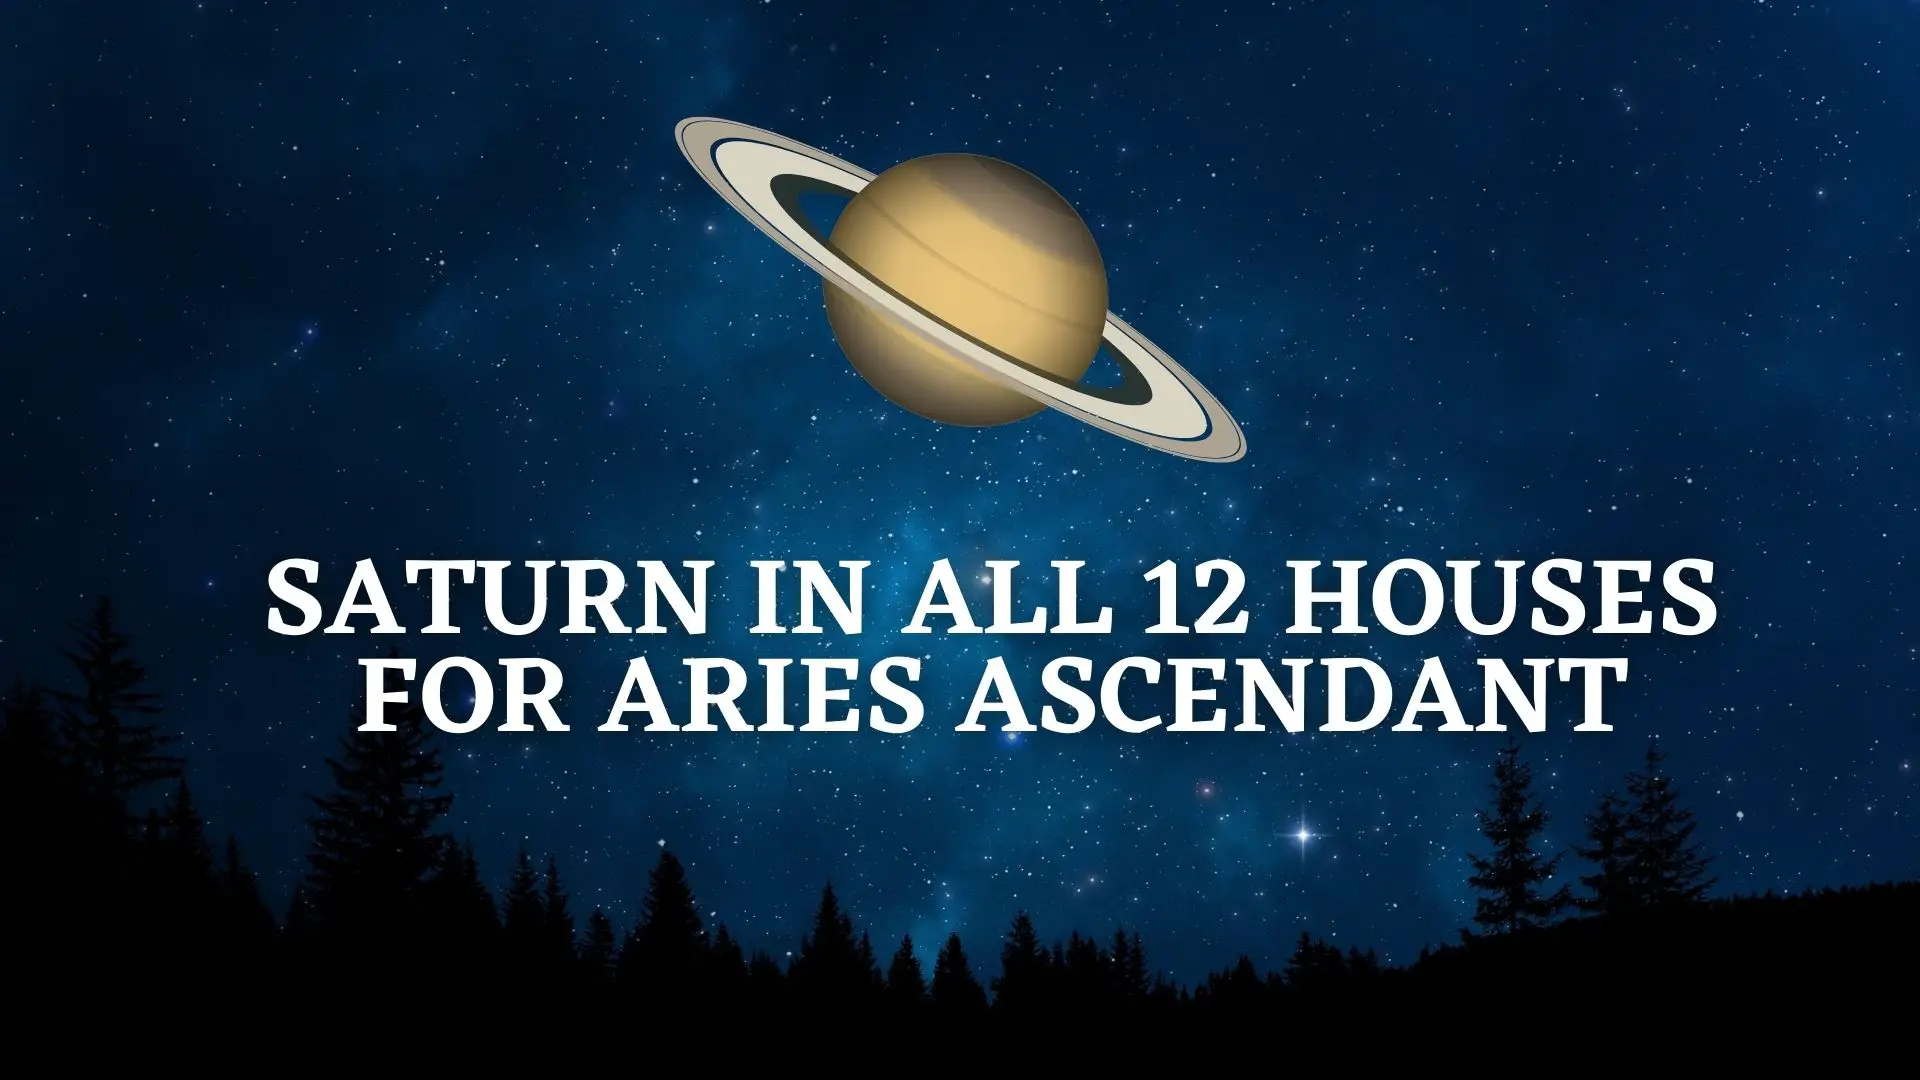 Saturn in all 12 houses for Aries Ascendant